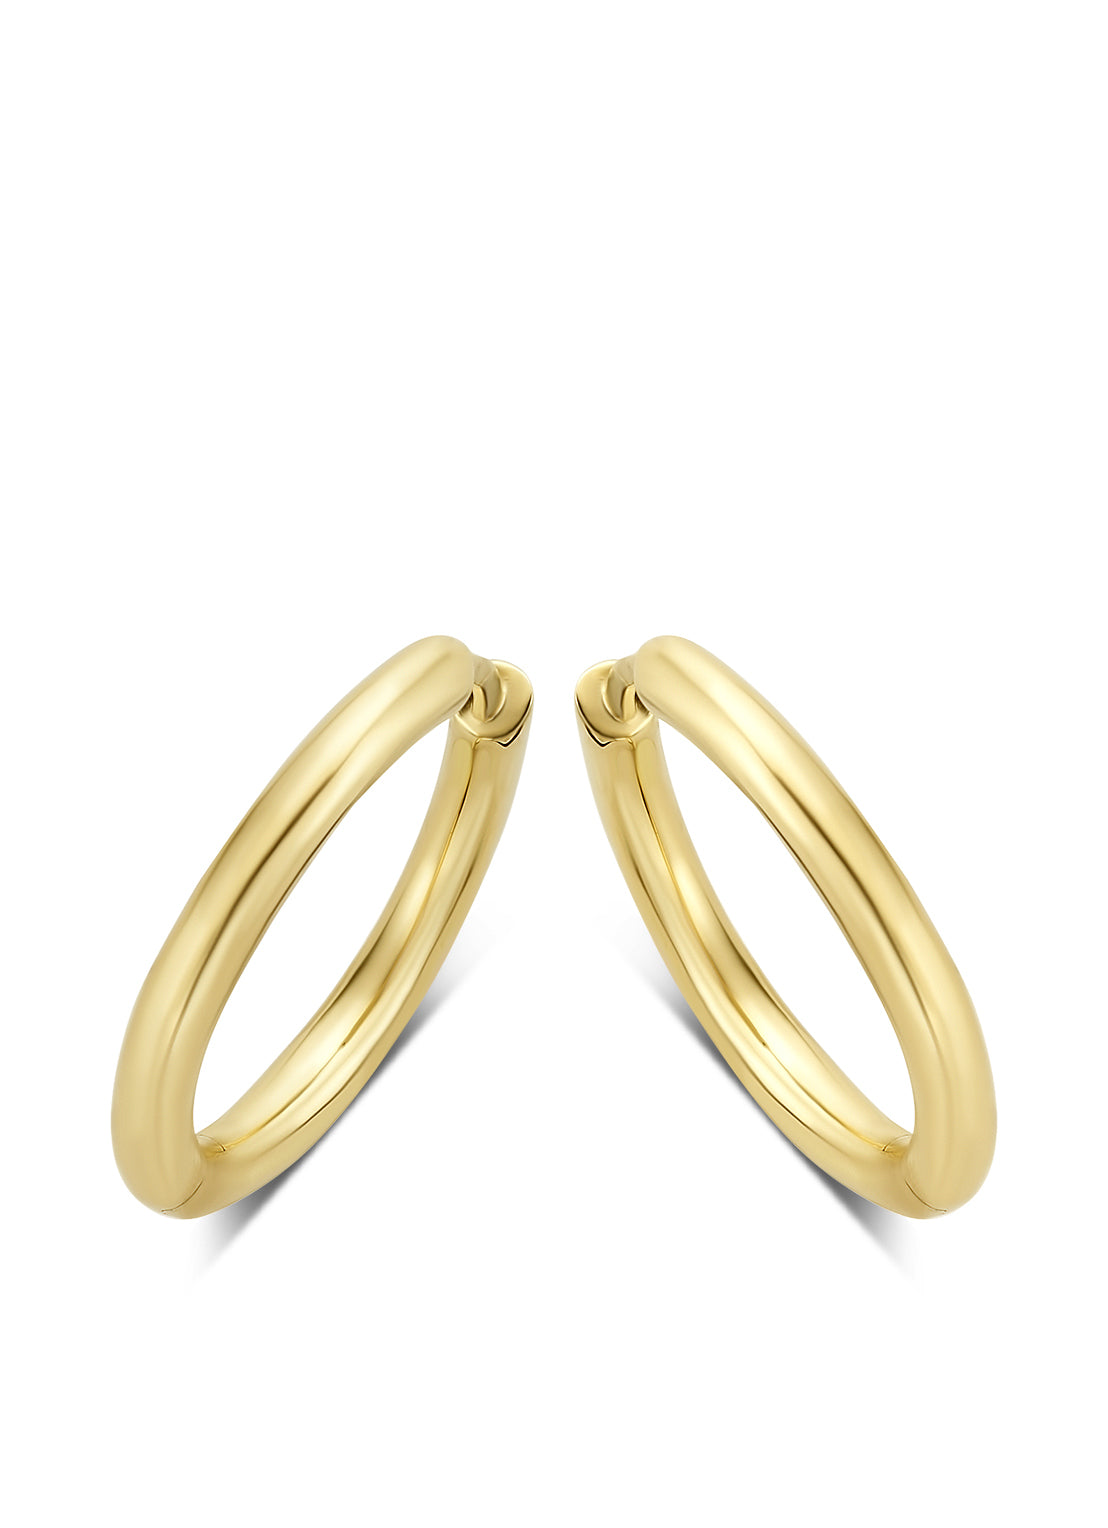 Yellow gold earrings Timeless Treasures S